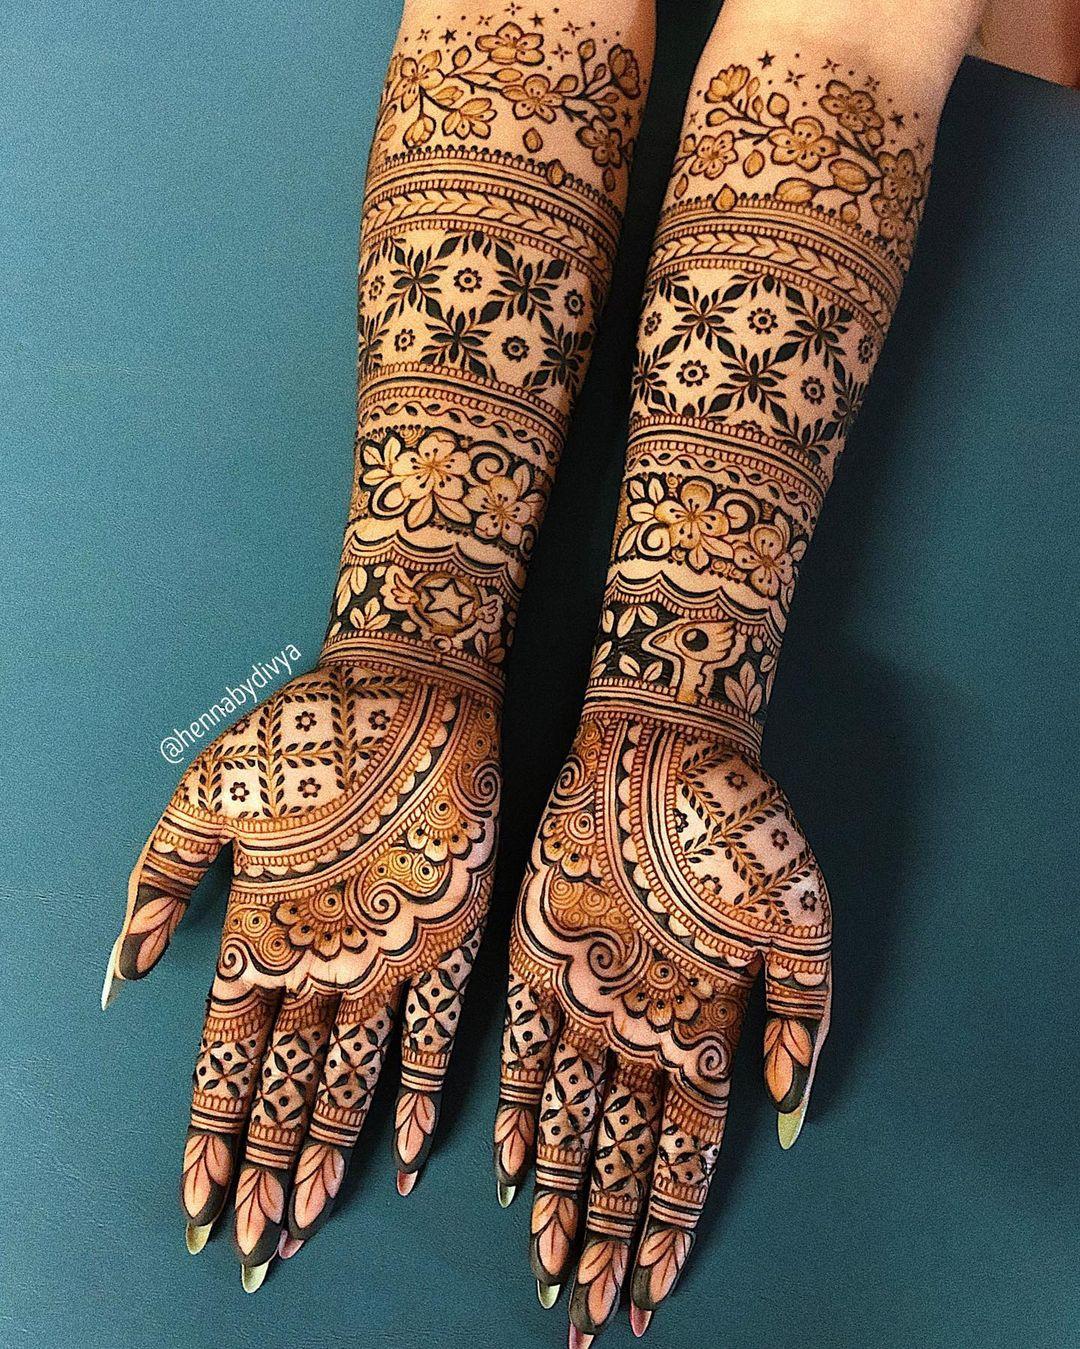 Latest Mehndi Designs for Karwa Chauth - Make Your Hands Instagram Worthy-cacanhphuclong.com.vn